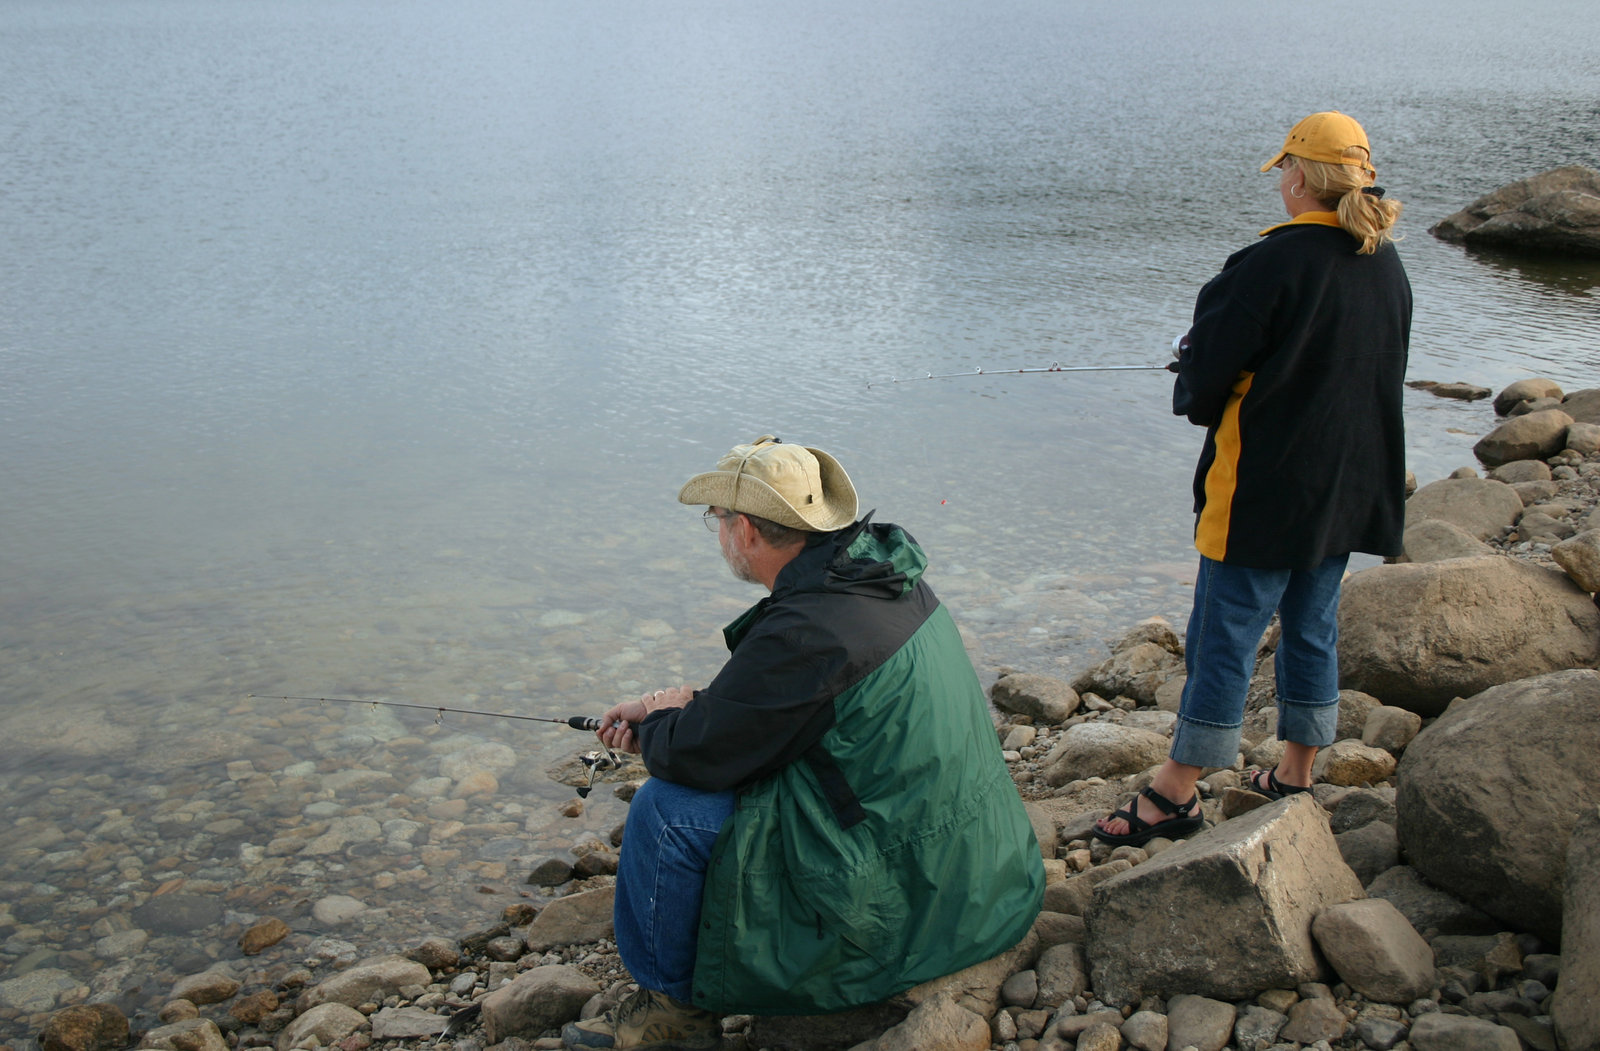 After obtaining their Colorado Fishing License, a couple goes fishing